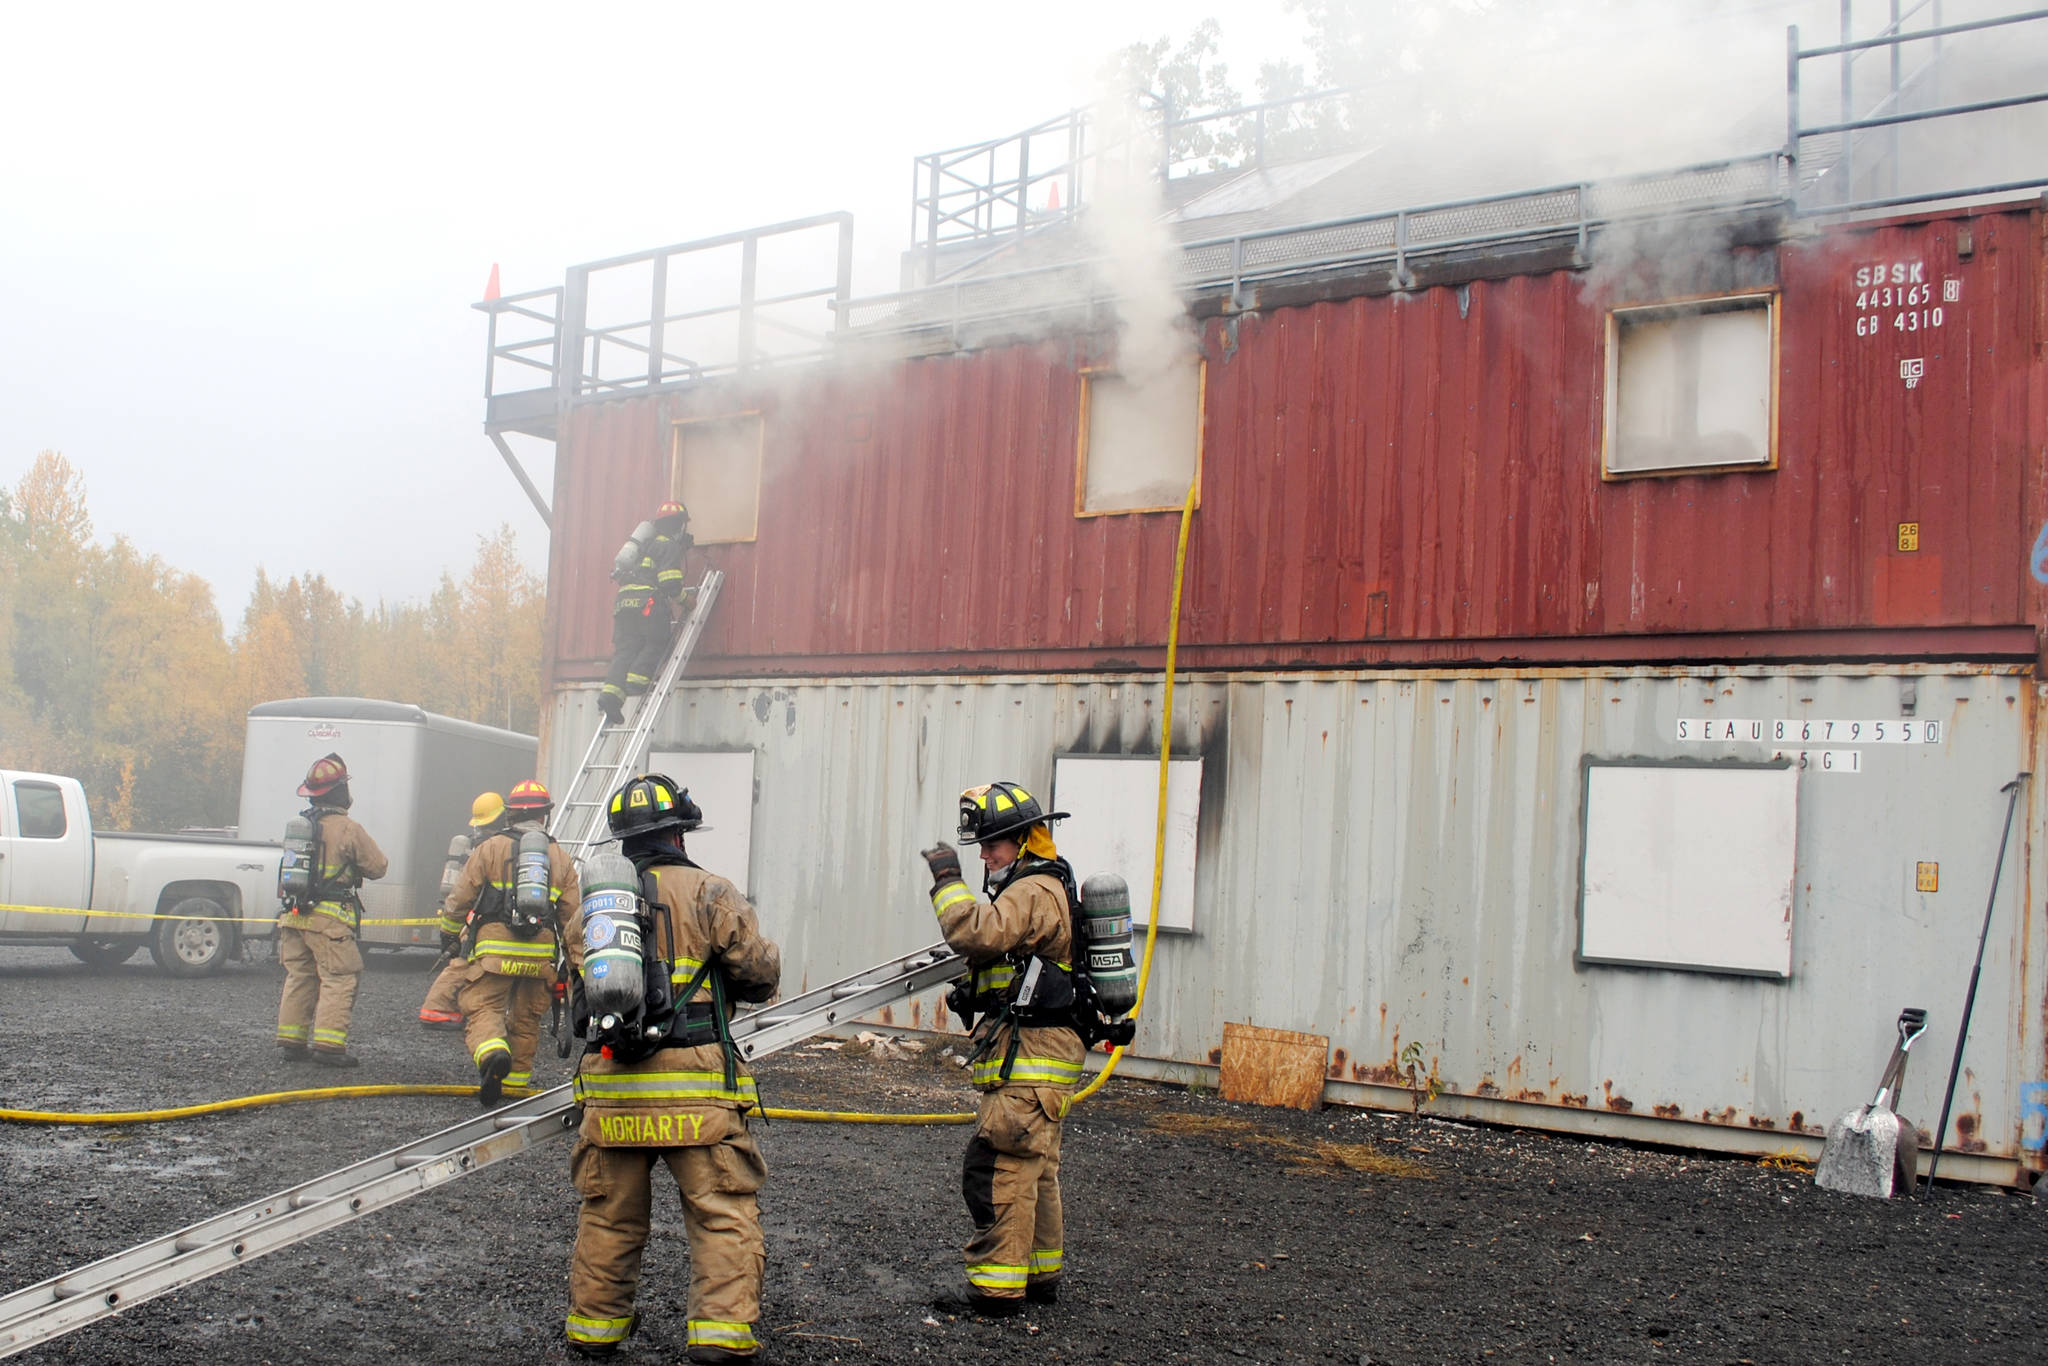 Firefighters respond to a controlled fire in a group of conexes off of Arc Loop Road in Soldotna. The area was set up to resemble a home and a fire was set in different sections of the building to test the firefighters. The training on Thursday was part of the Alaska Fire Conference which is being held in Kenai this week. (Photo by Kat Sorensen/Peninsula Clarion)